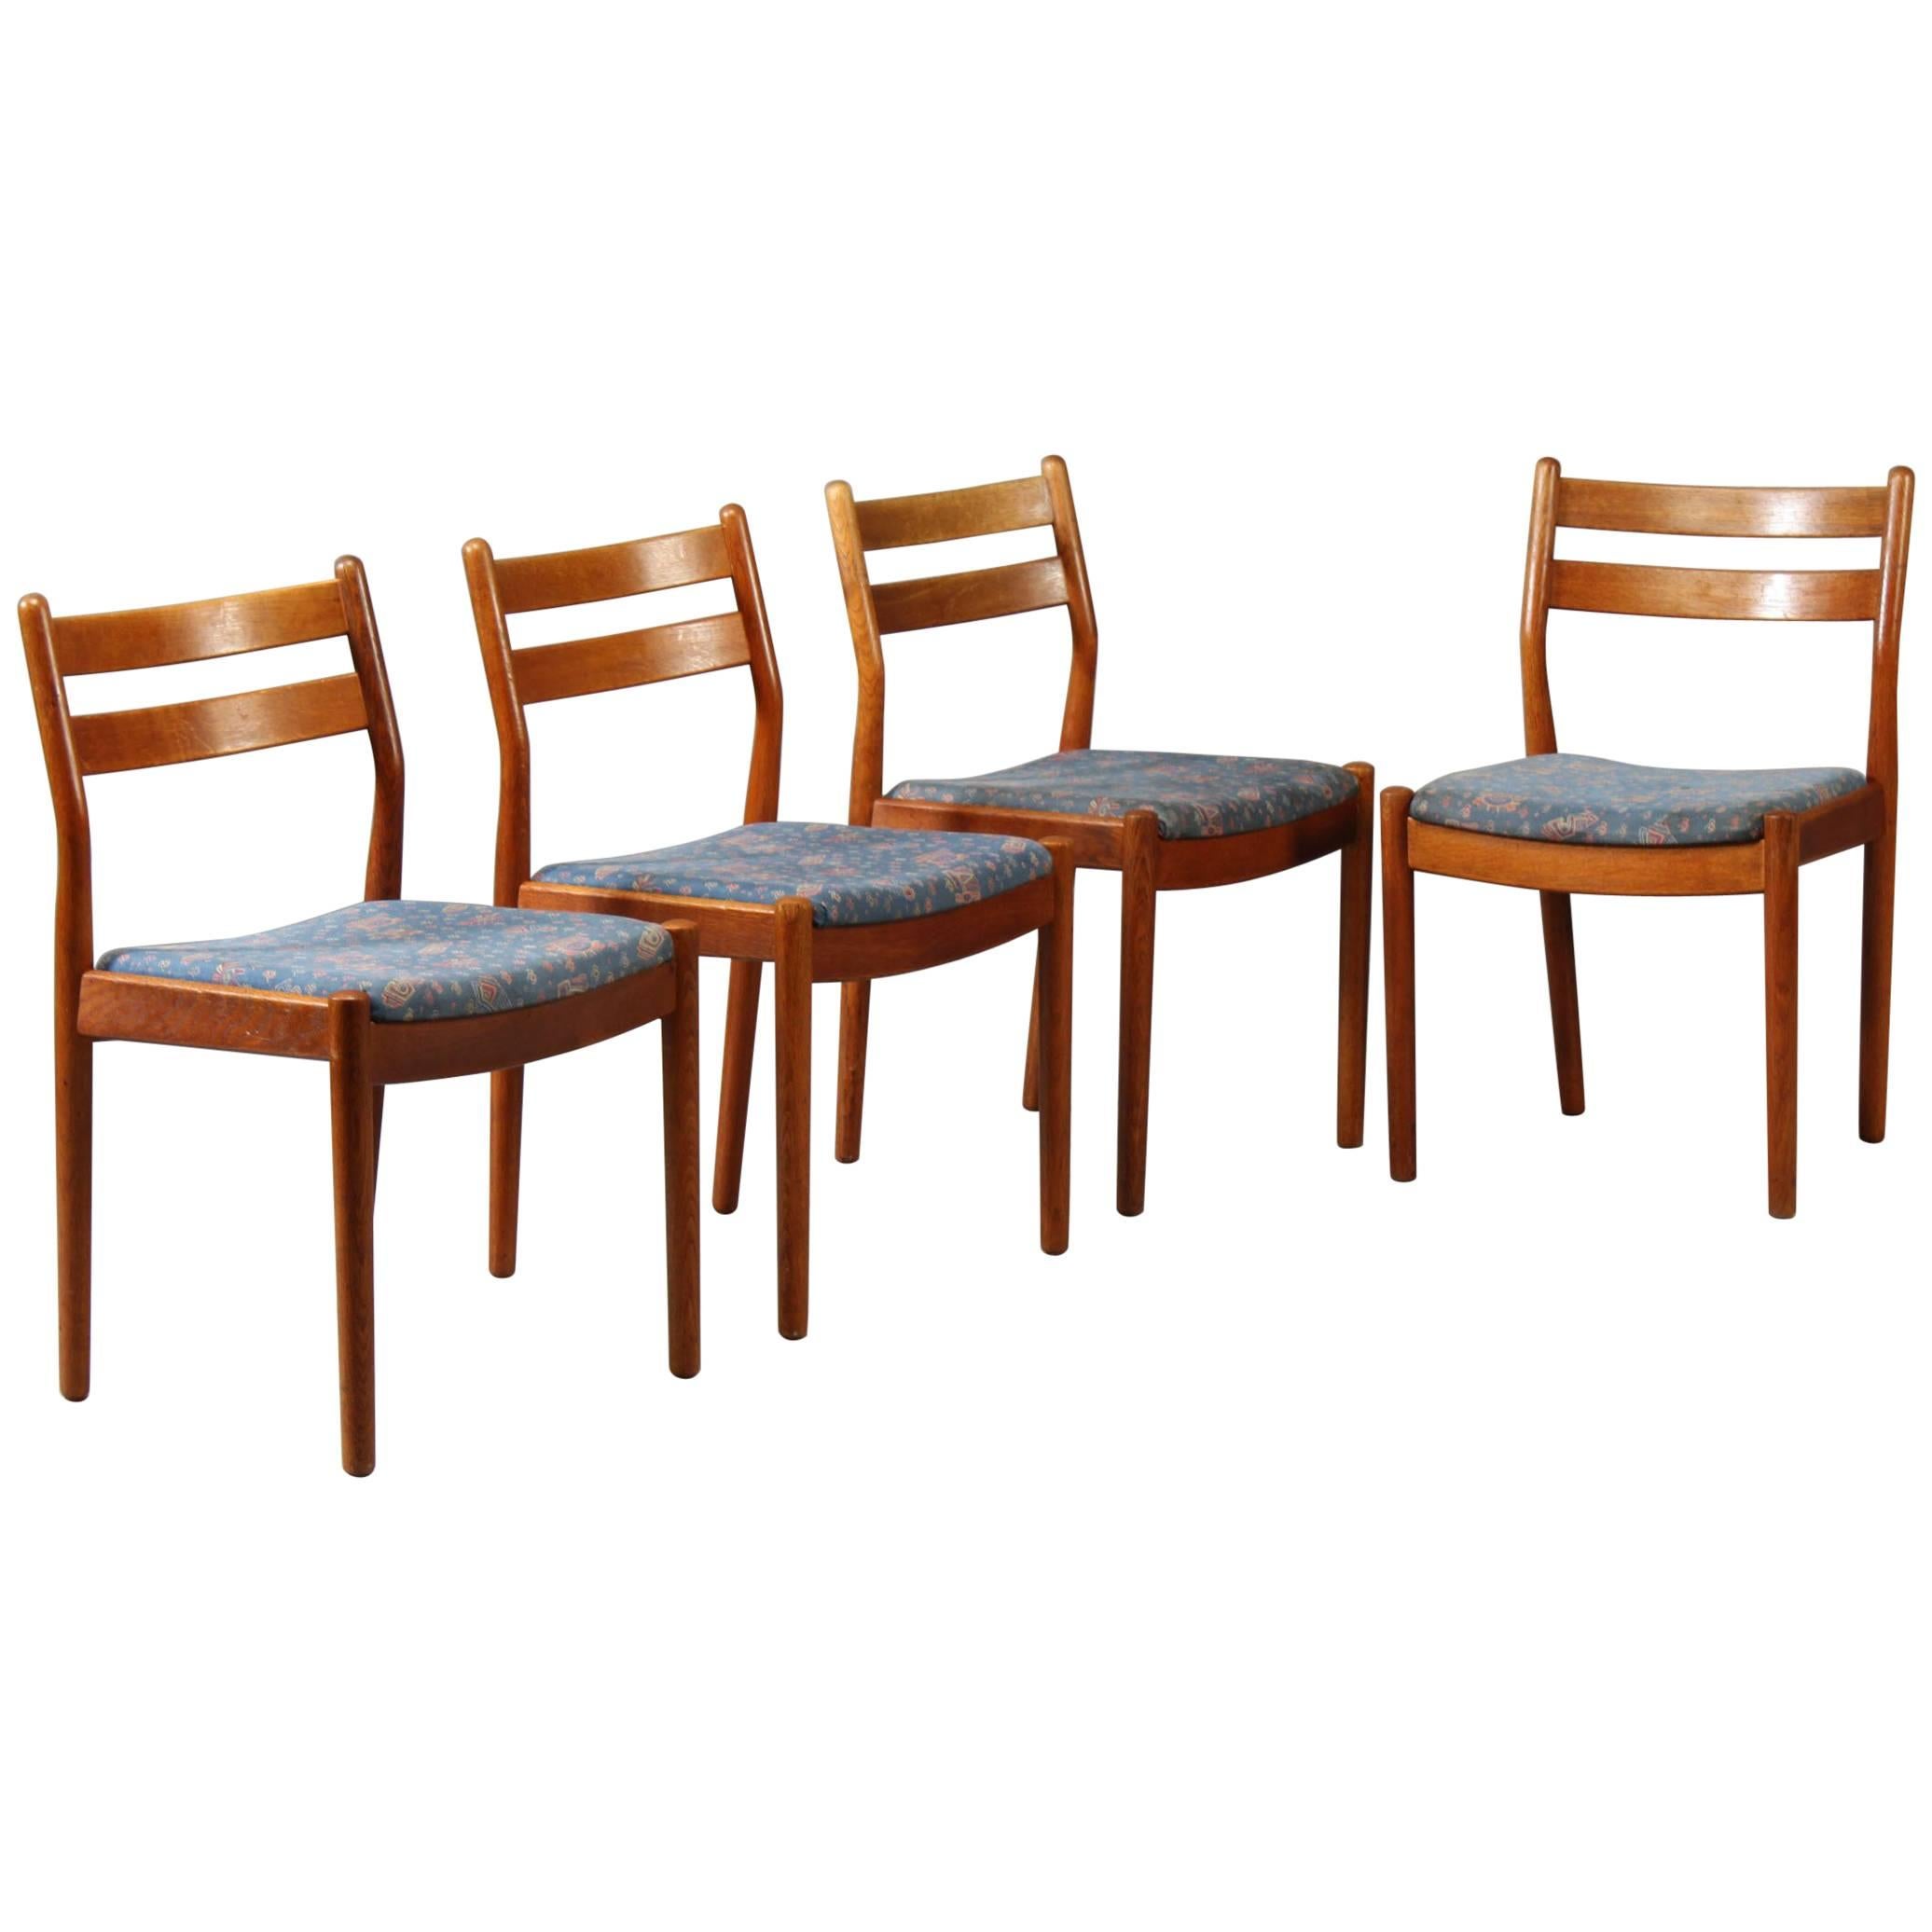 1960s Set of Four Reupholstered Danish Dining Chairs Model J61 by Poul Volther